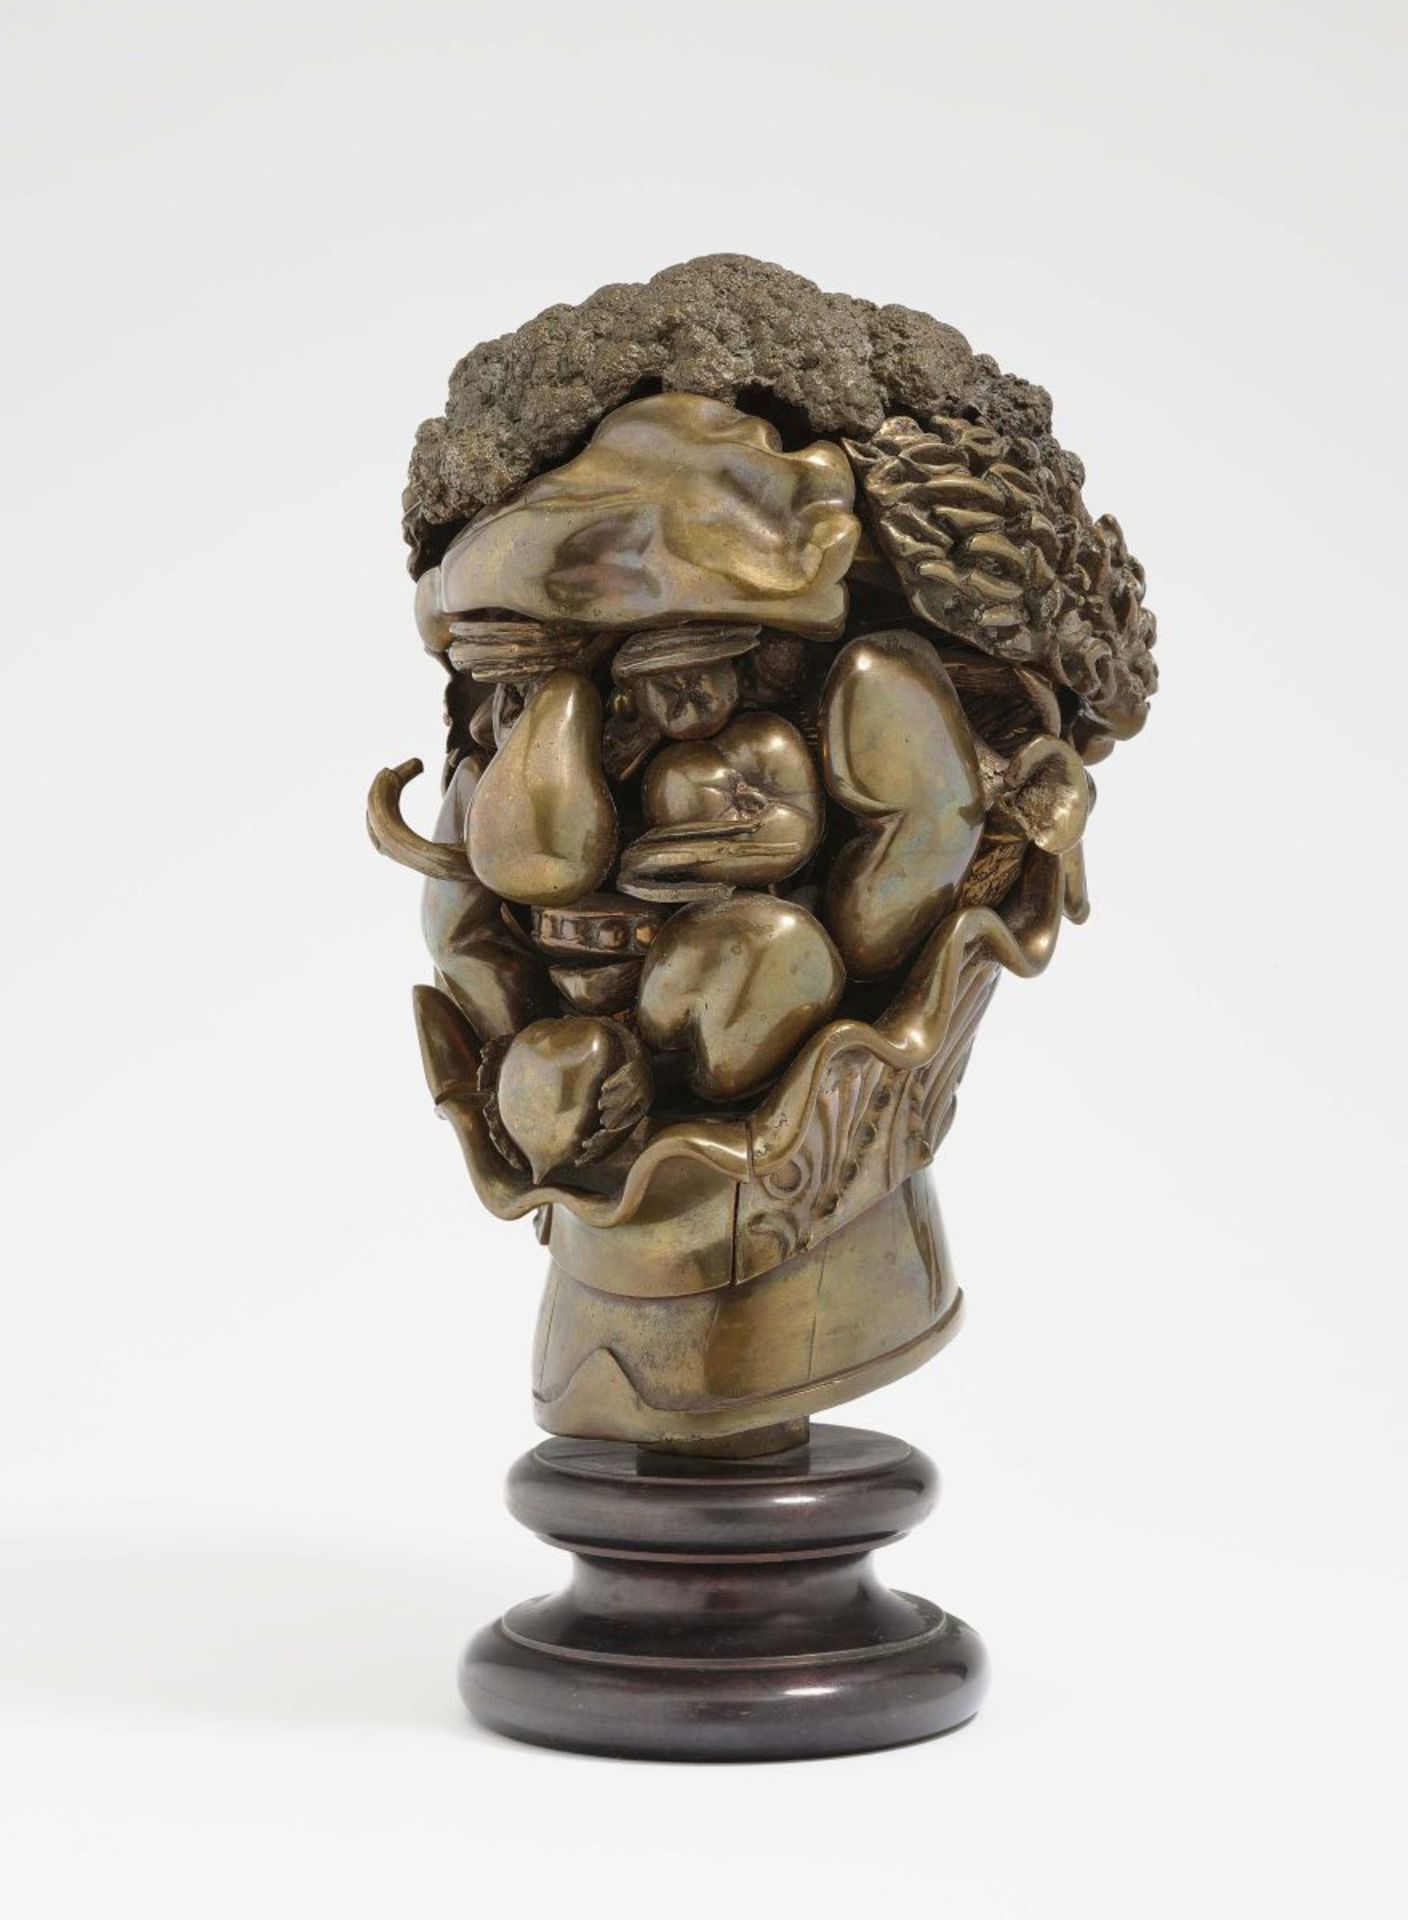 Berrocal, MiguelOmaggio ad Arcimboldo. 1976-1979 Polished bronze, consisting of 30 movable